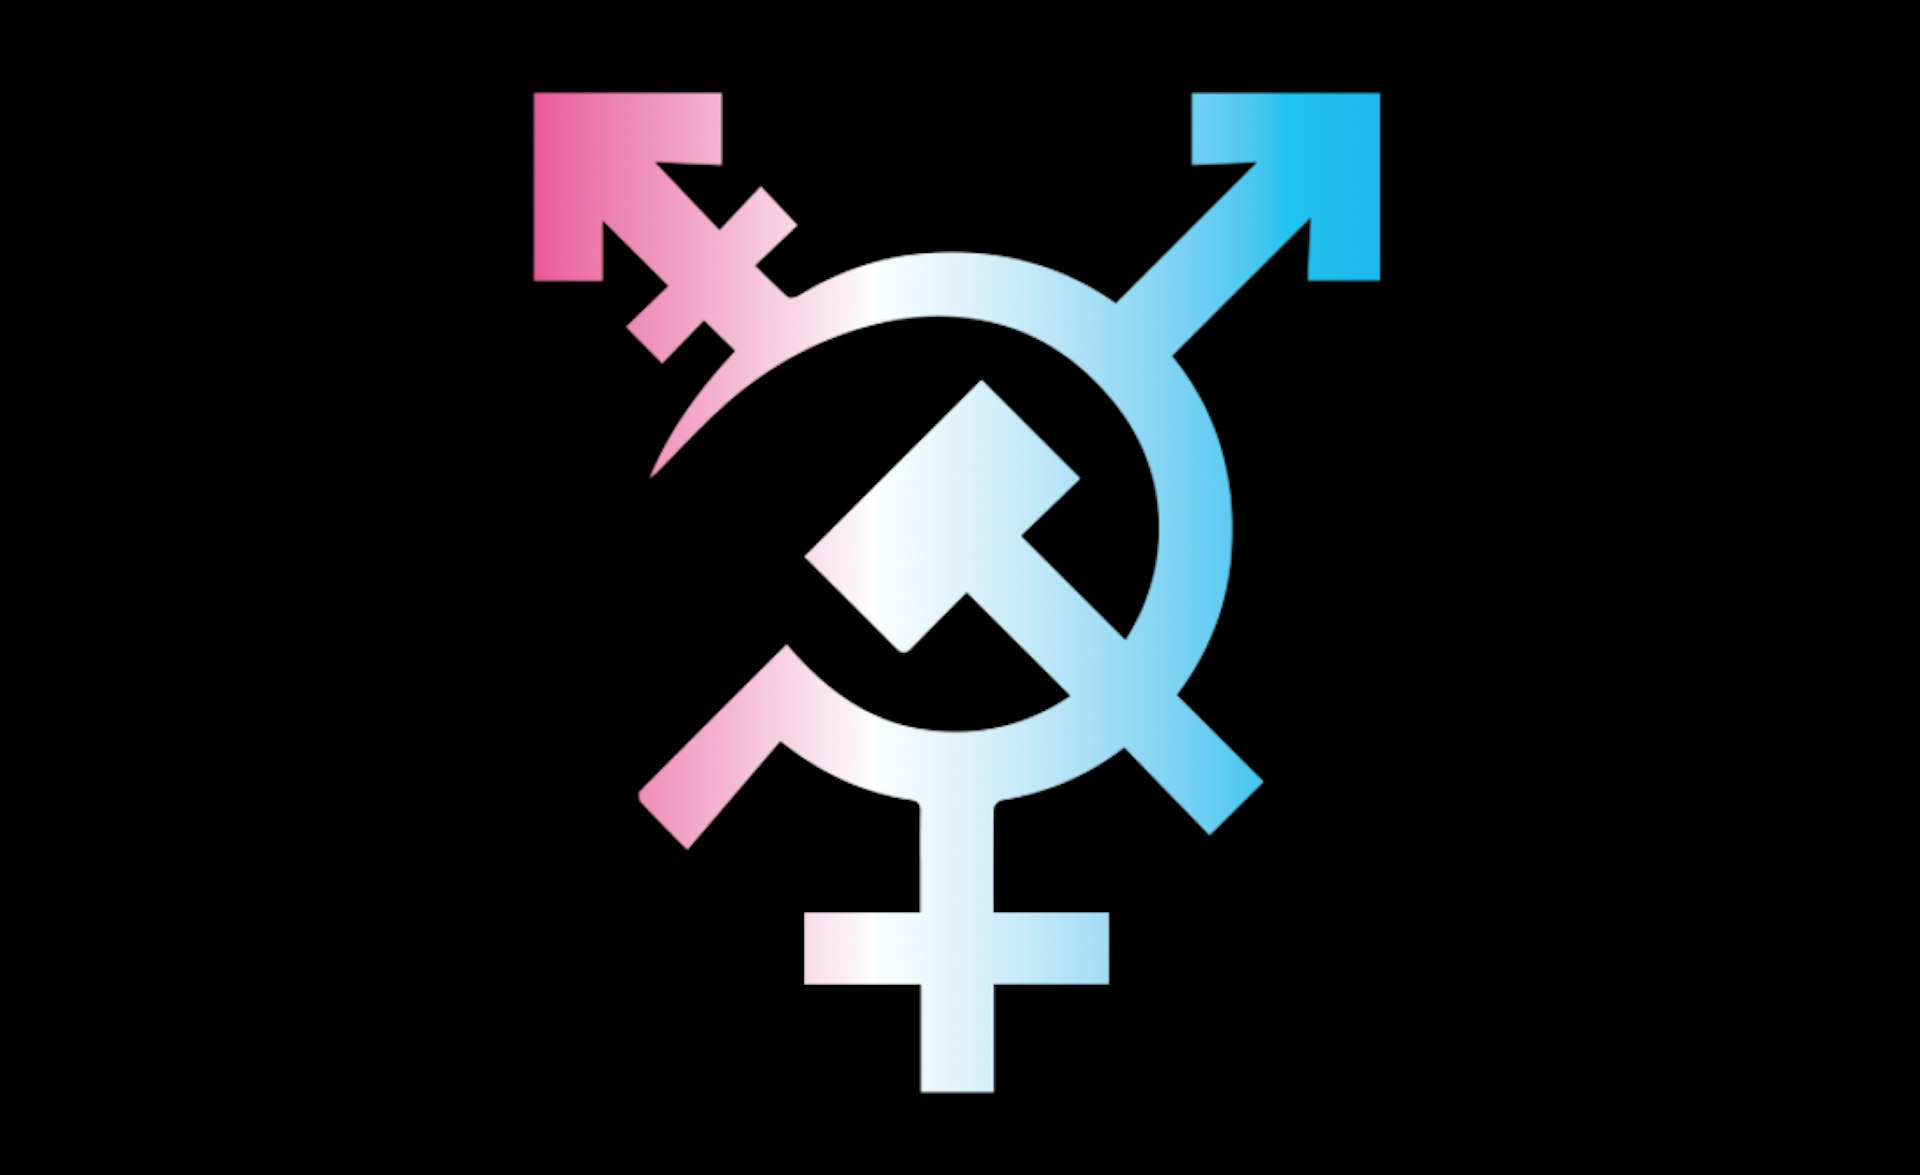 Why trans liberation means abolishing capitalism